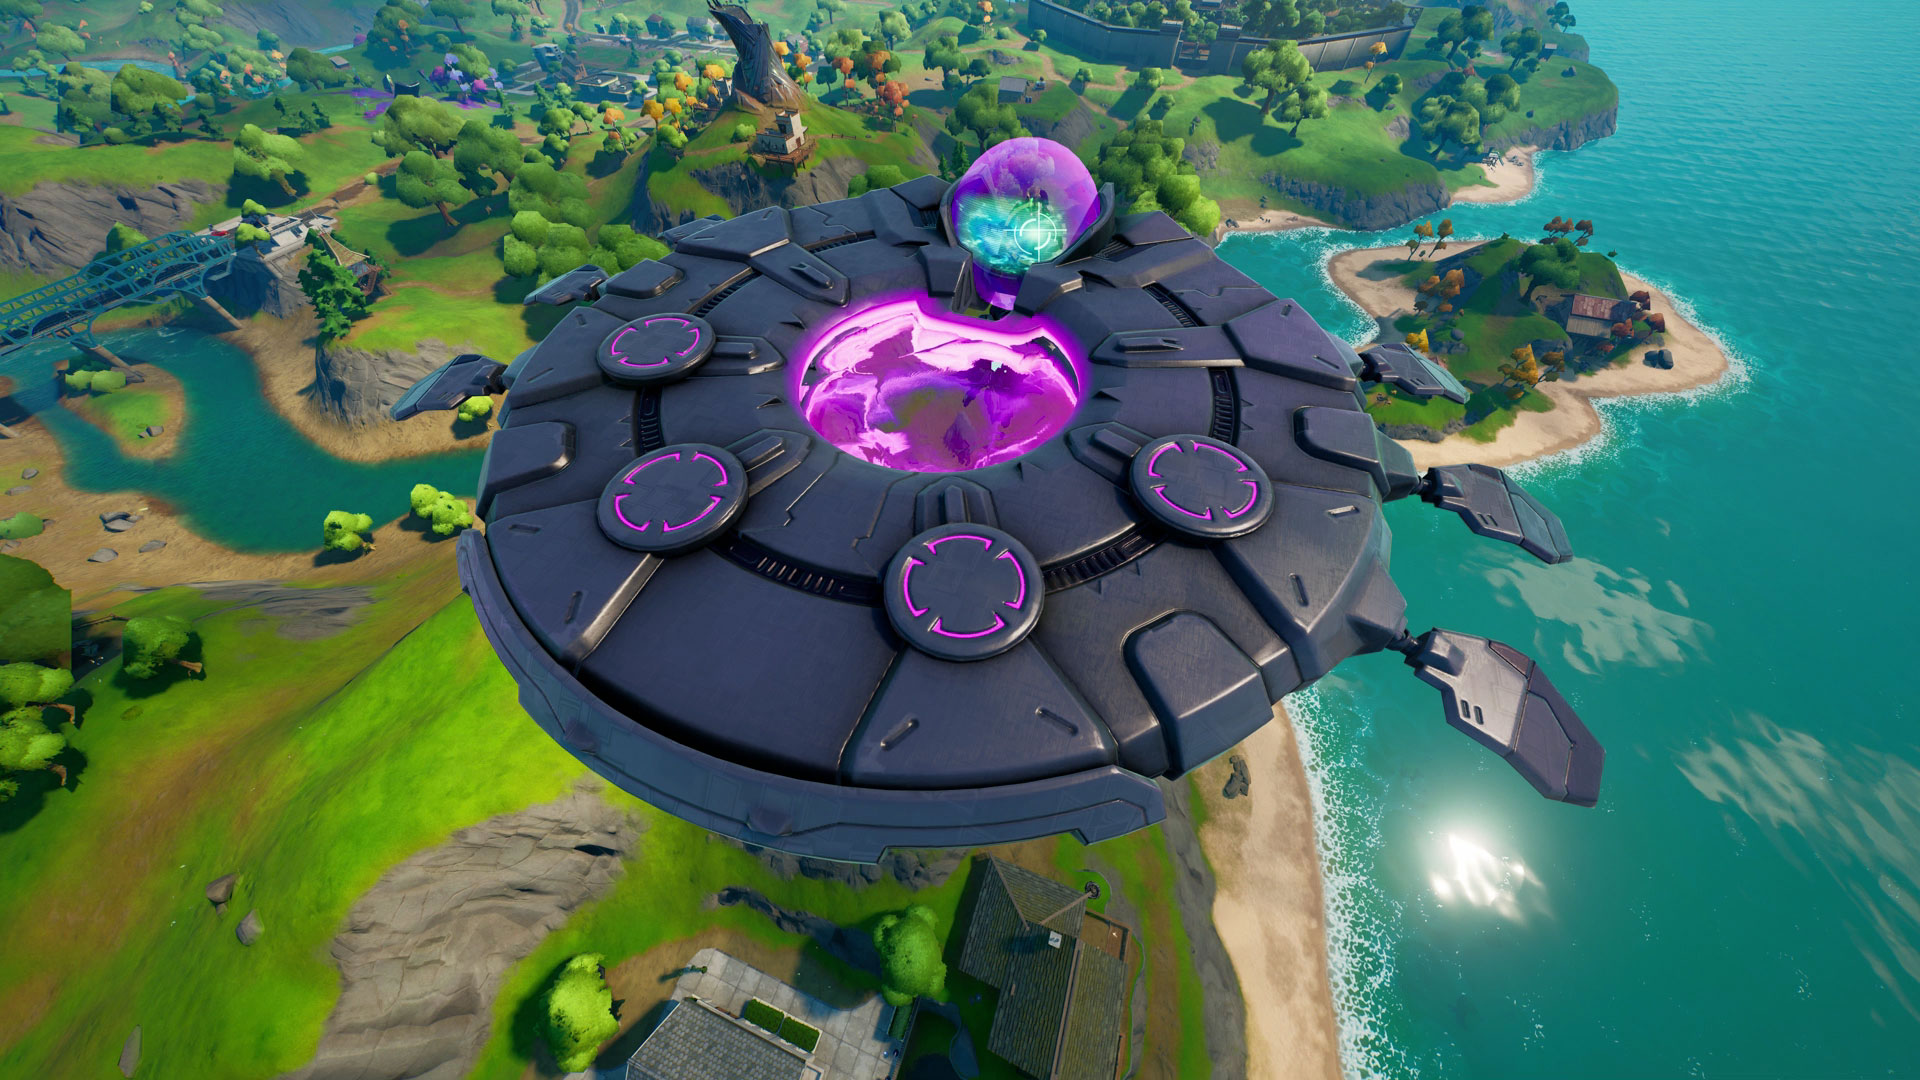 Where Are The Ufo Vehicles In Fortnite Fortnite Ufos Locations How To Enter A Fortnite Saucer Gamesradar